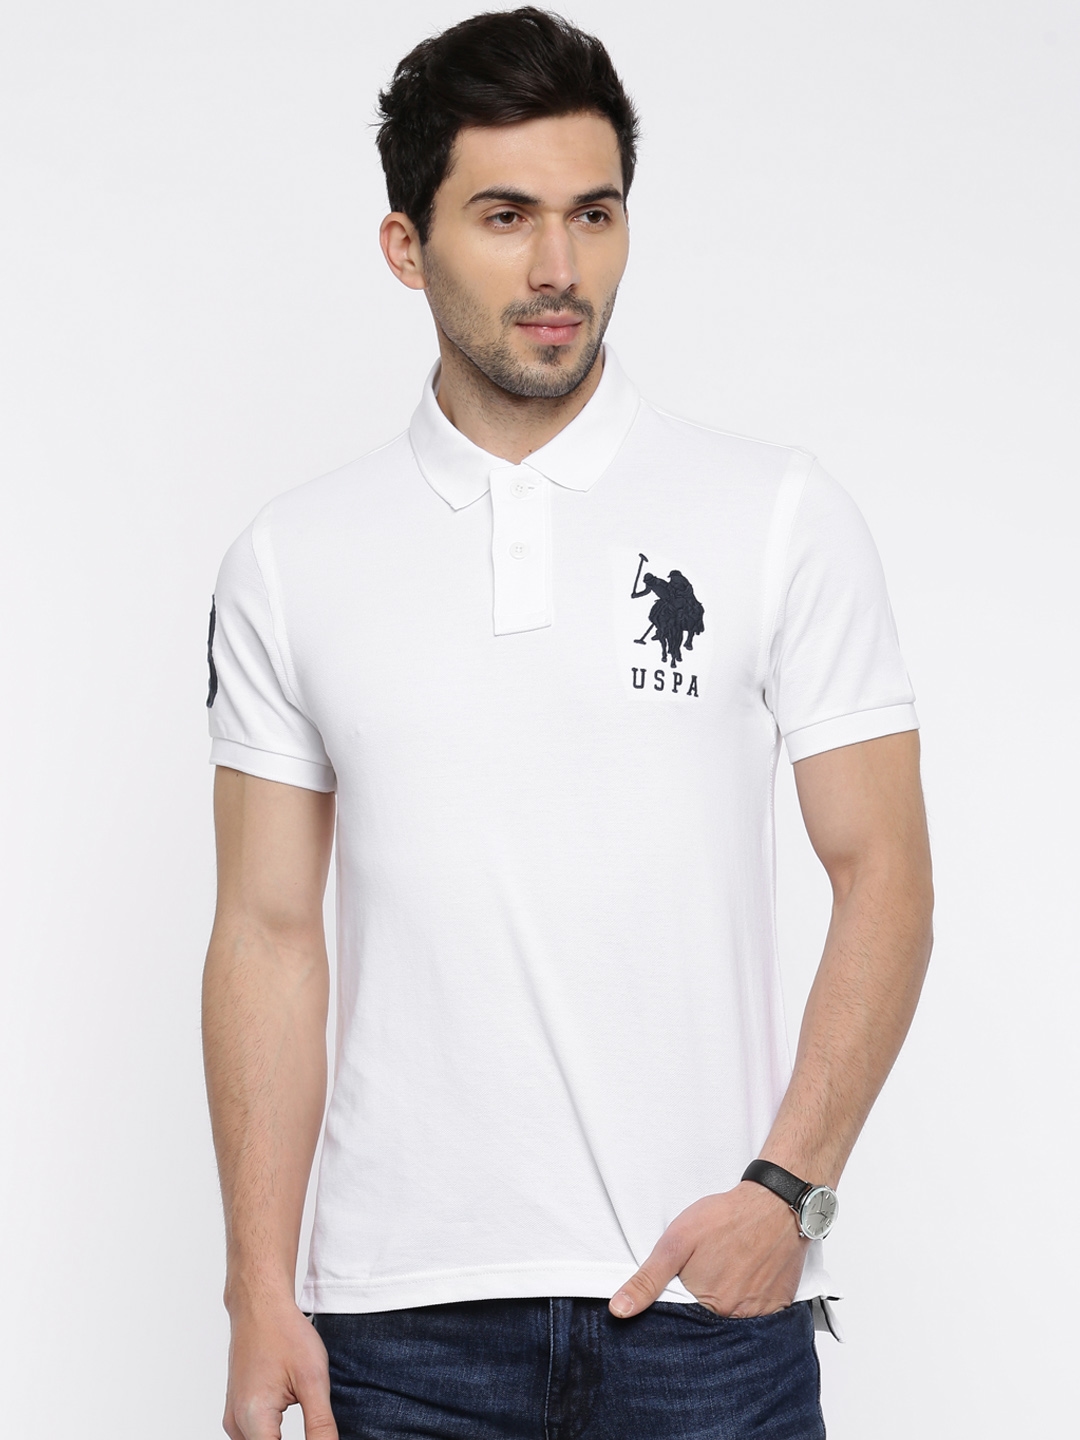 t shirt and polo